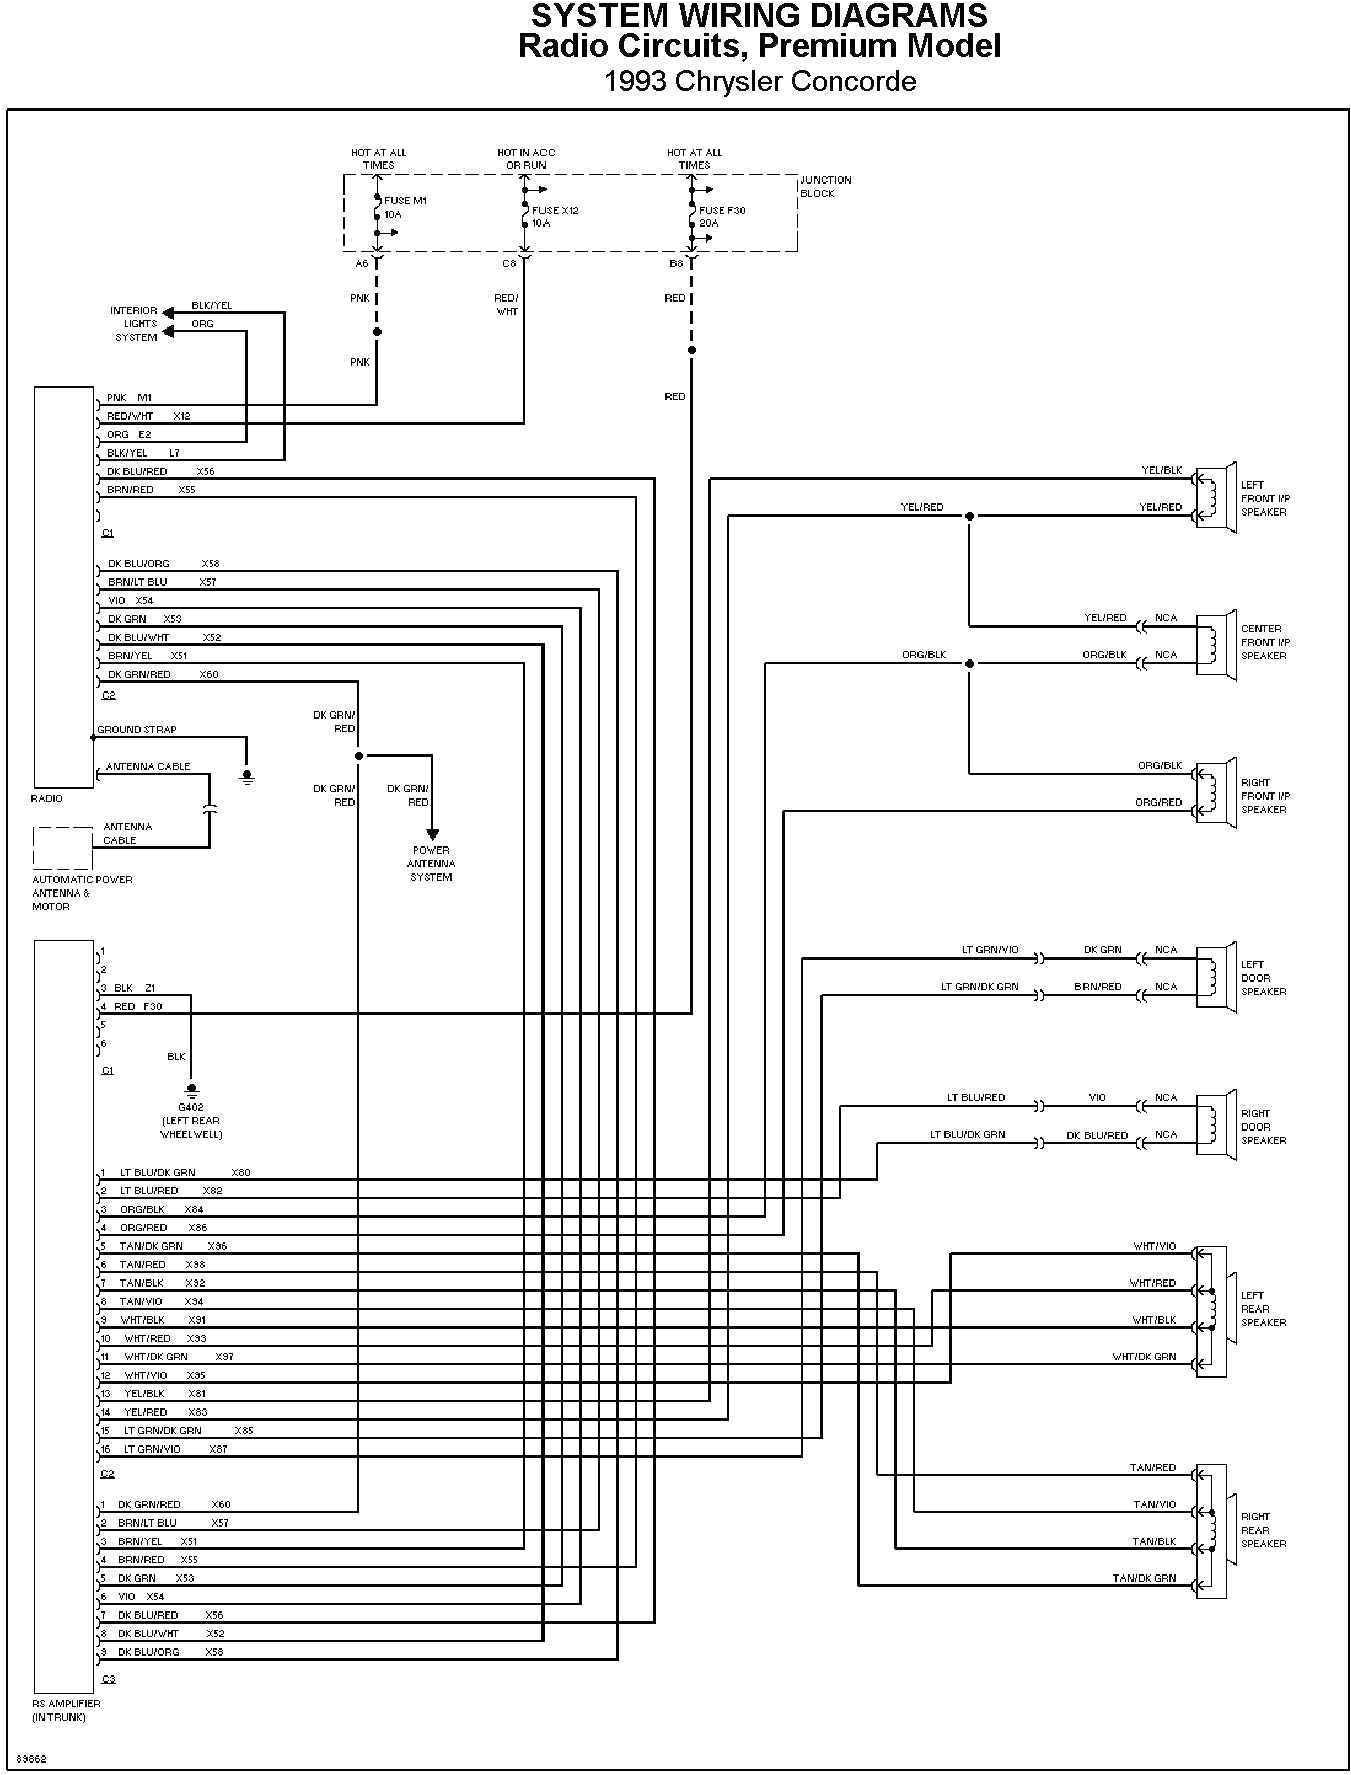 2008 dodge ram infinity amp wiring diagram collection